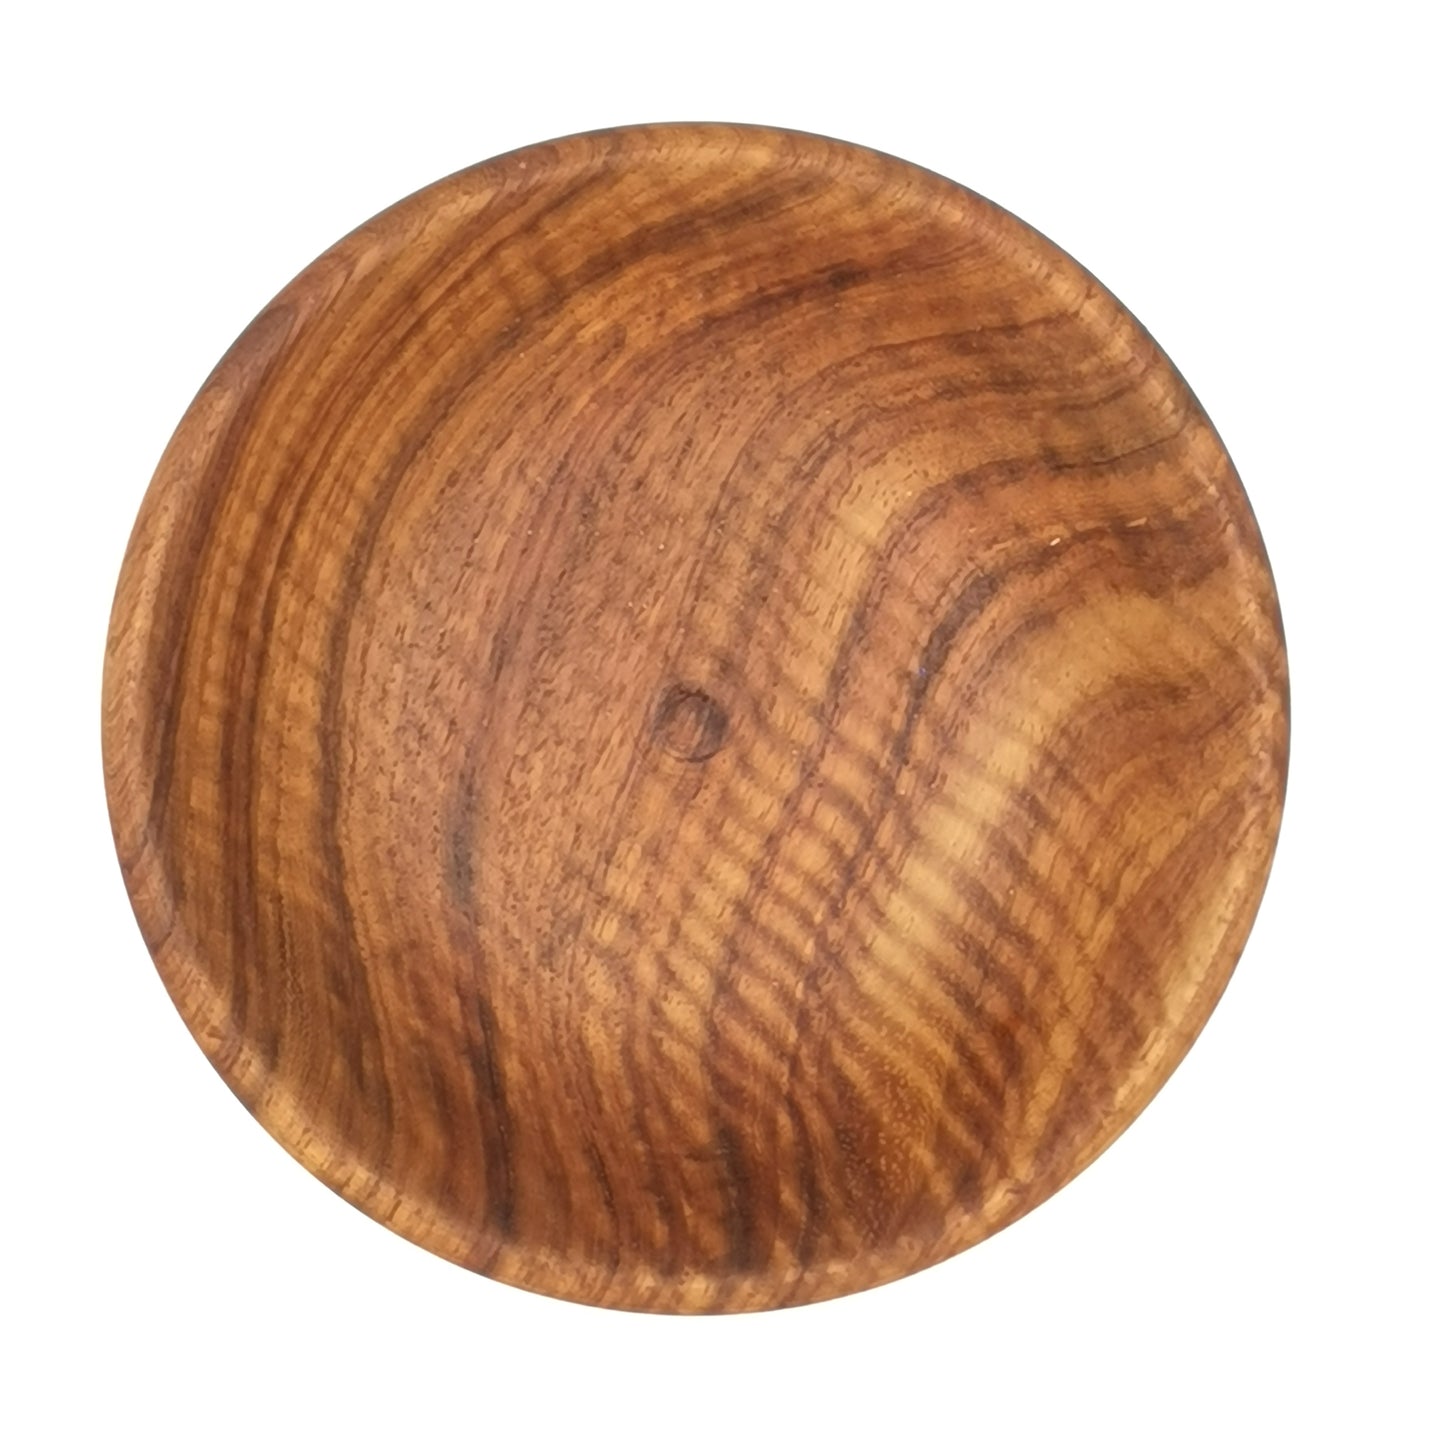 Wooden Bowl with Slanted Sides - Sneezewood